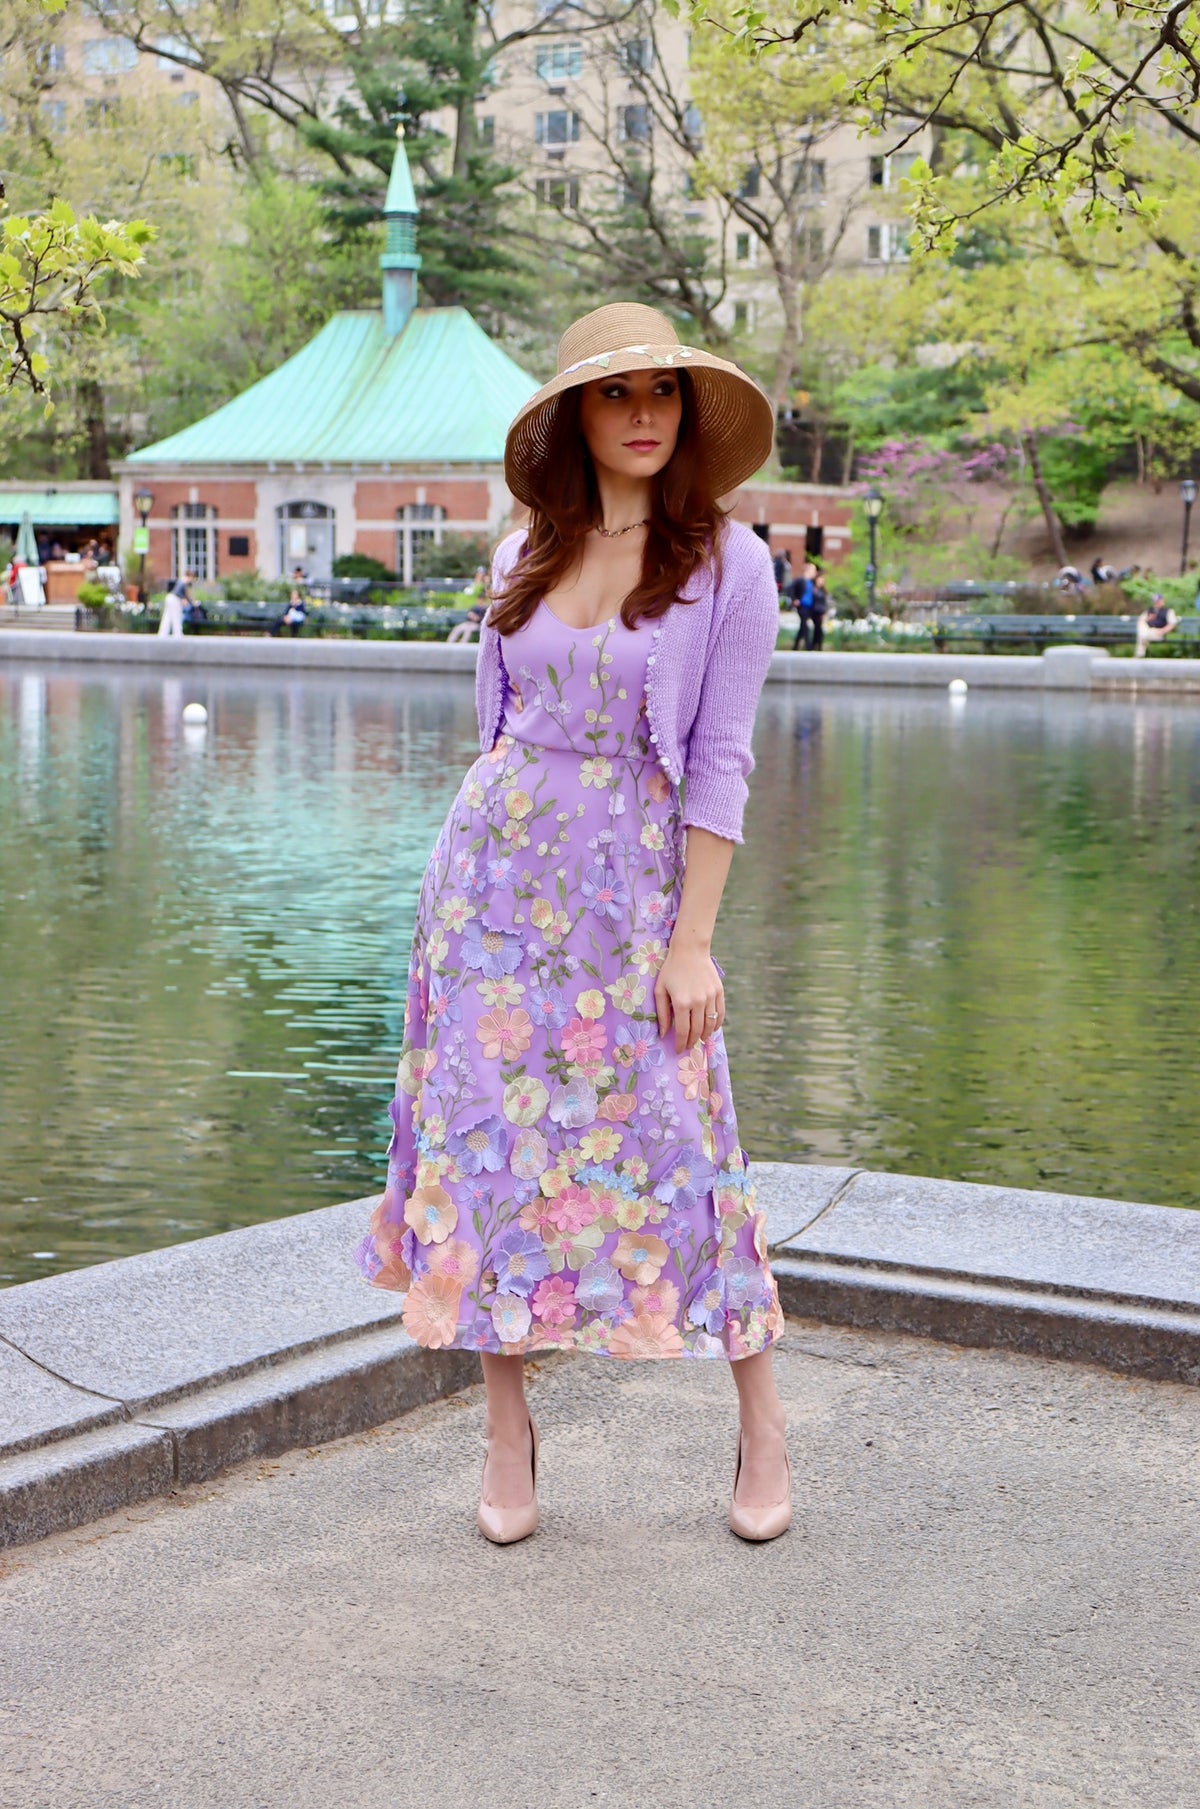 Model in lilac midi length dress with satin floral appliquéd details with matching lilac cropped sweater and floral detail straw sun hat.